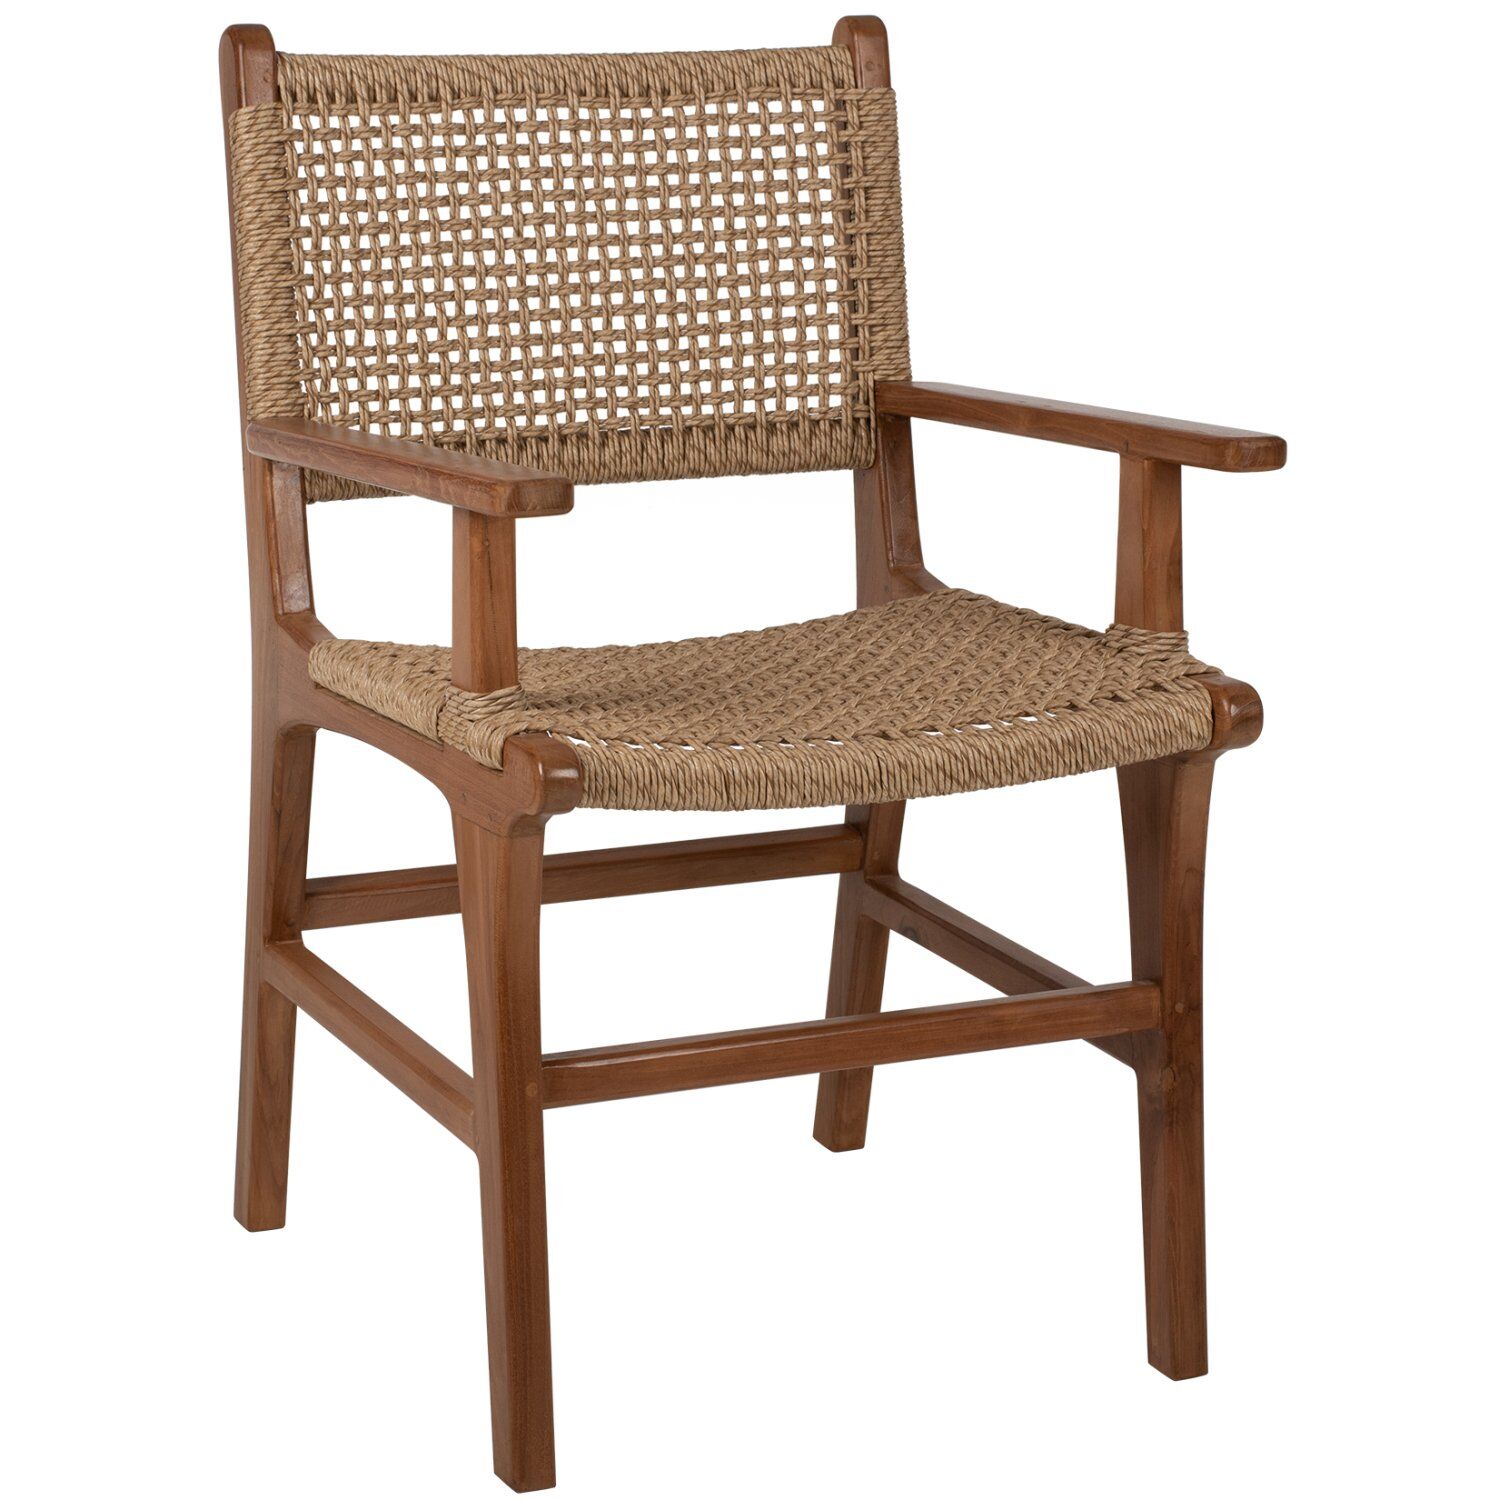 ARMCHAIR SOLID TEAK NATURAL COLOR KNITTED RATTAN ROPE 54Χ58Χ88Hcm.HM9385.01